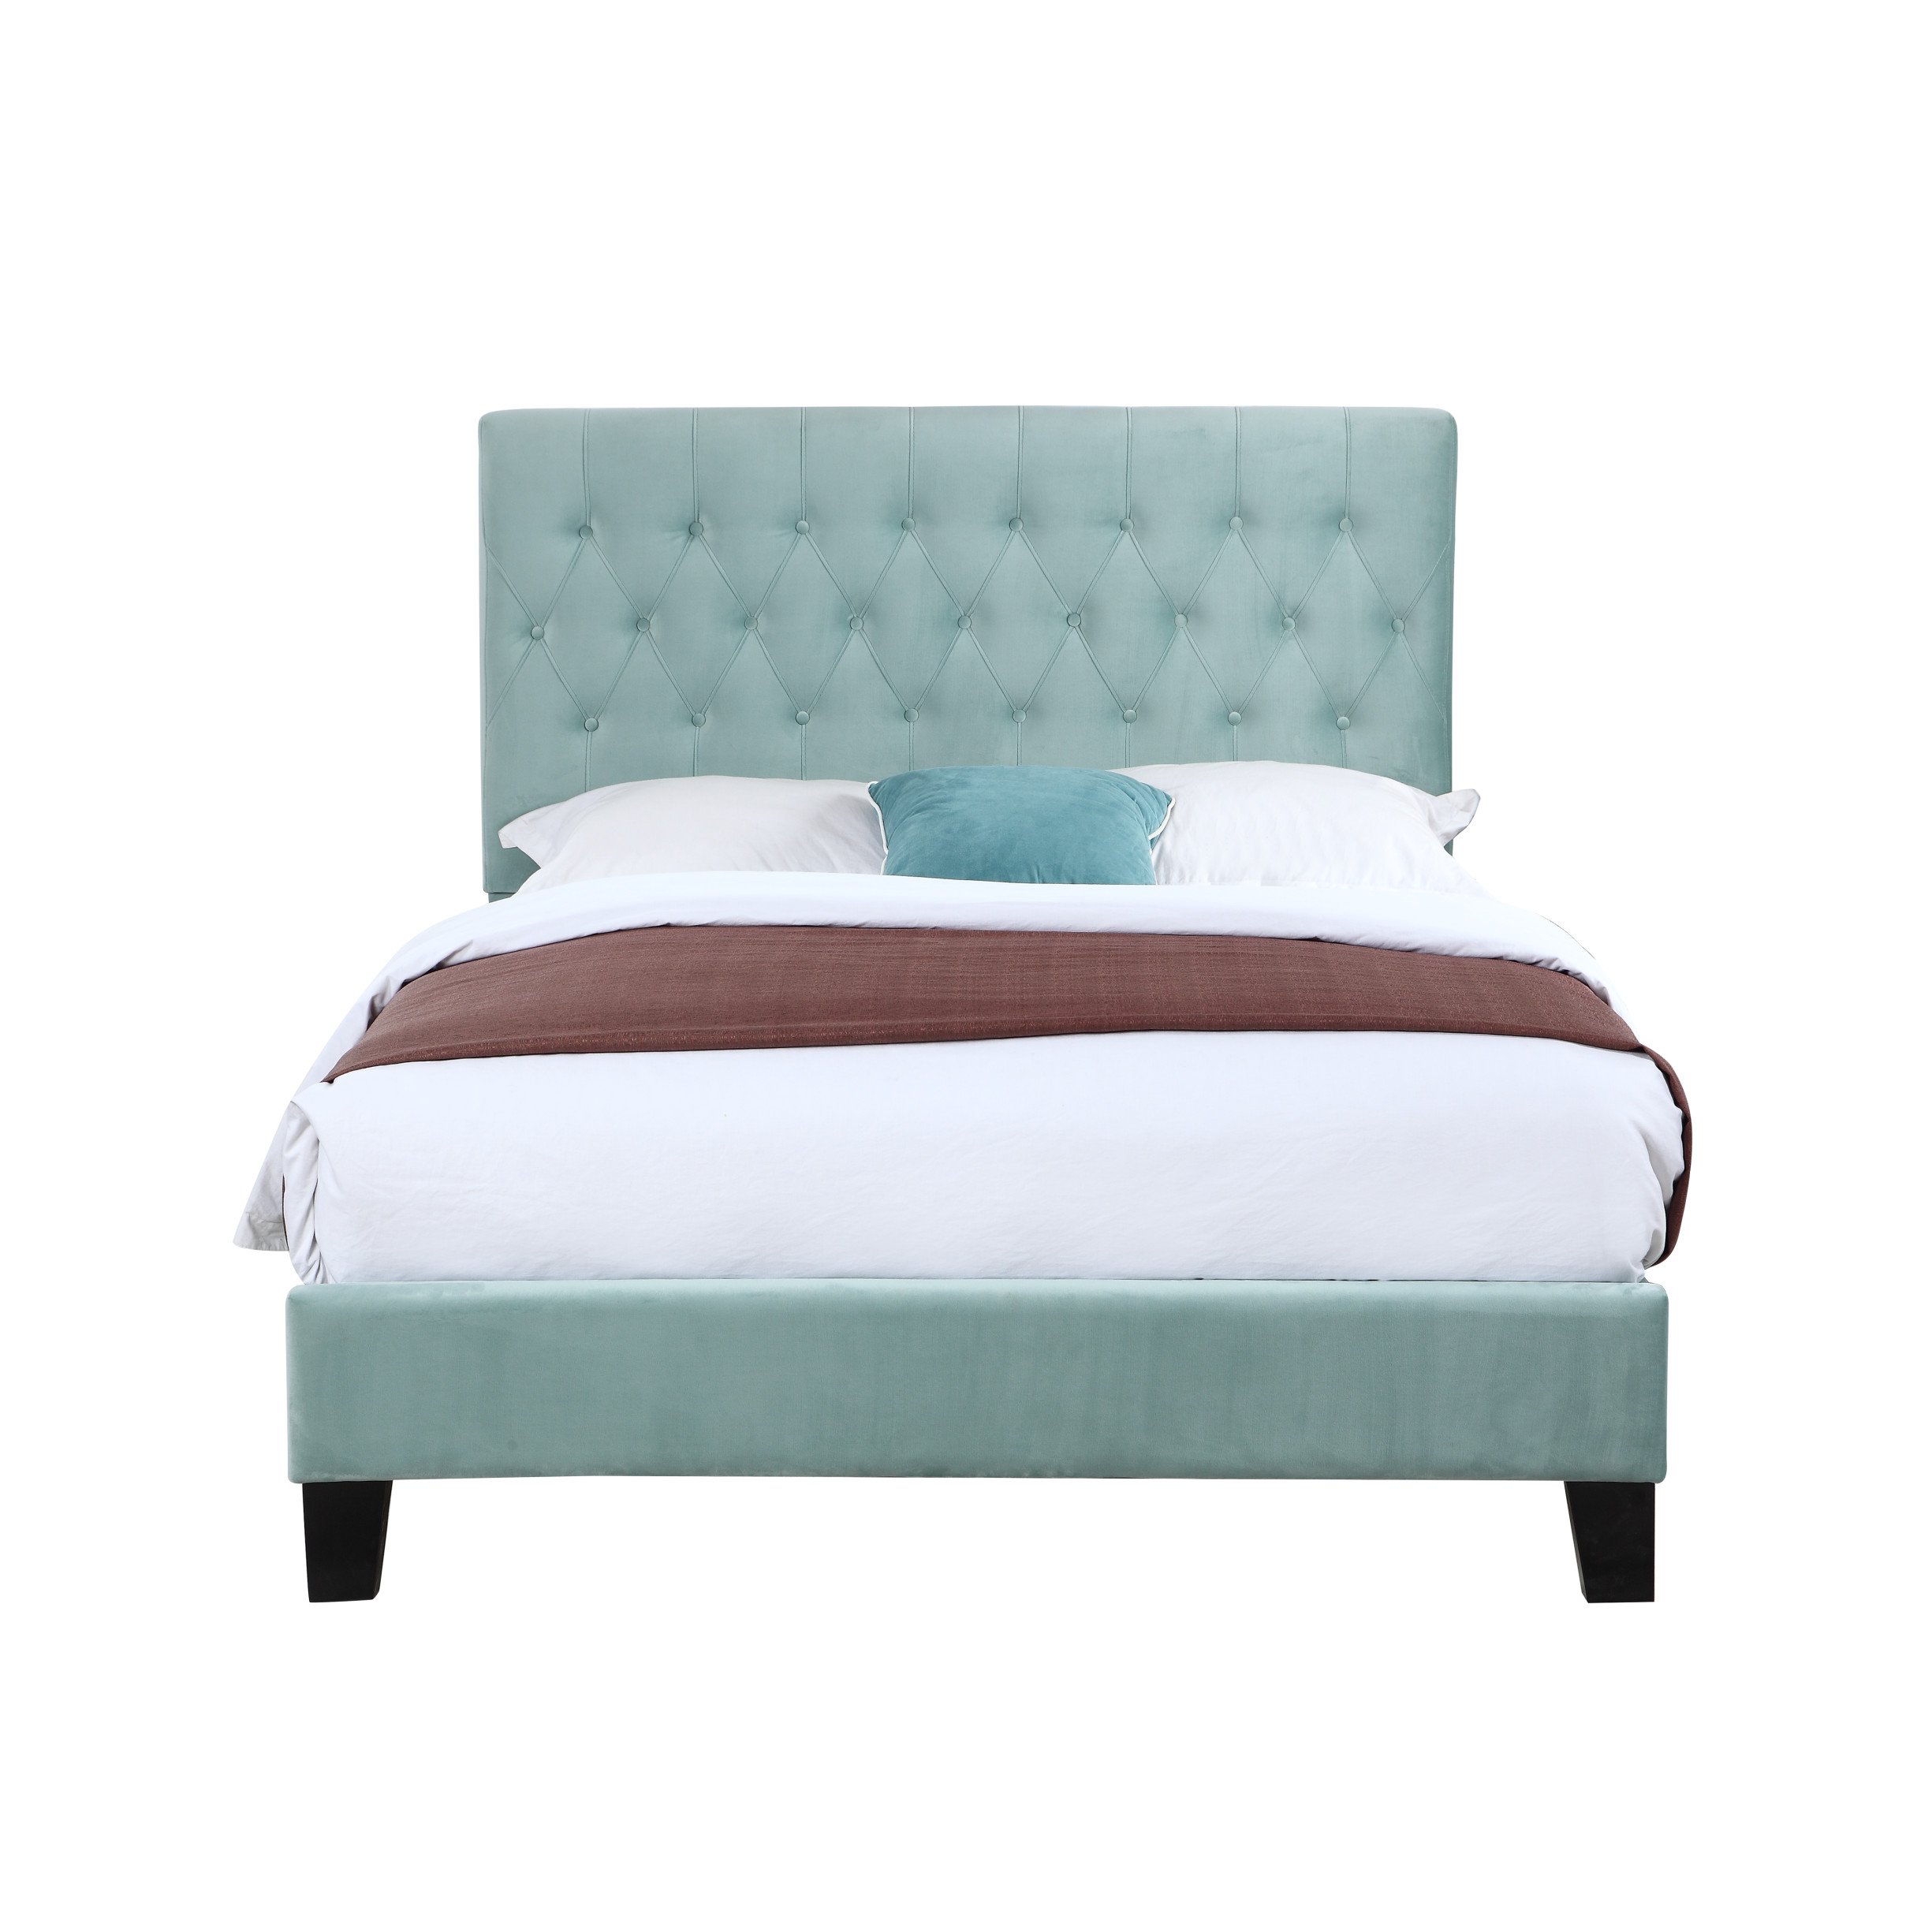 Book Cover Artum Hill Upholstered Bed With Tufted, Padded Headboard, And Platform-Style Base